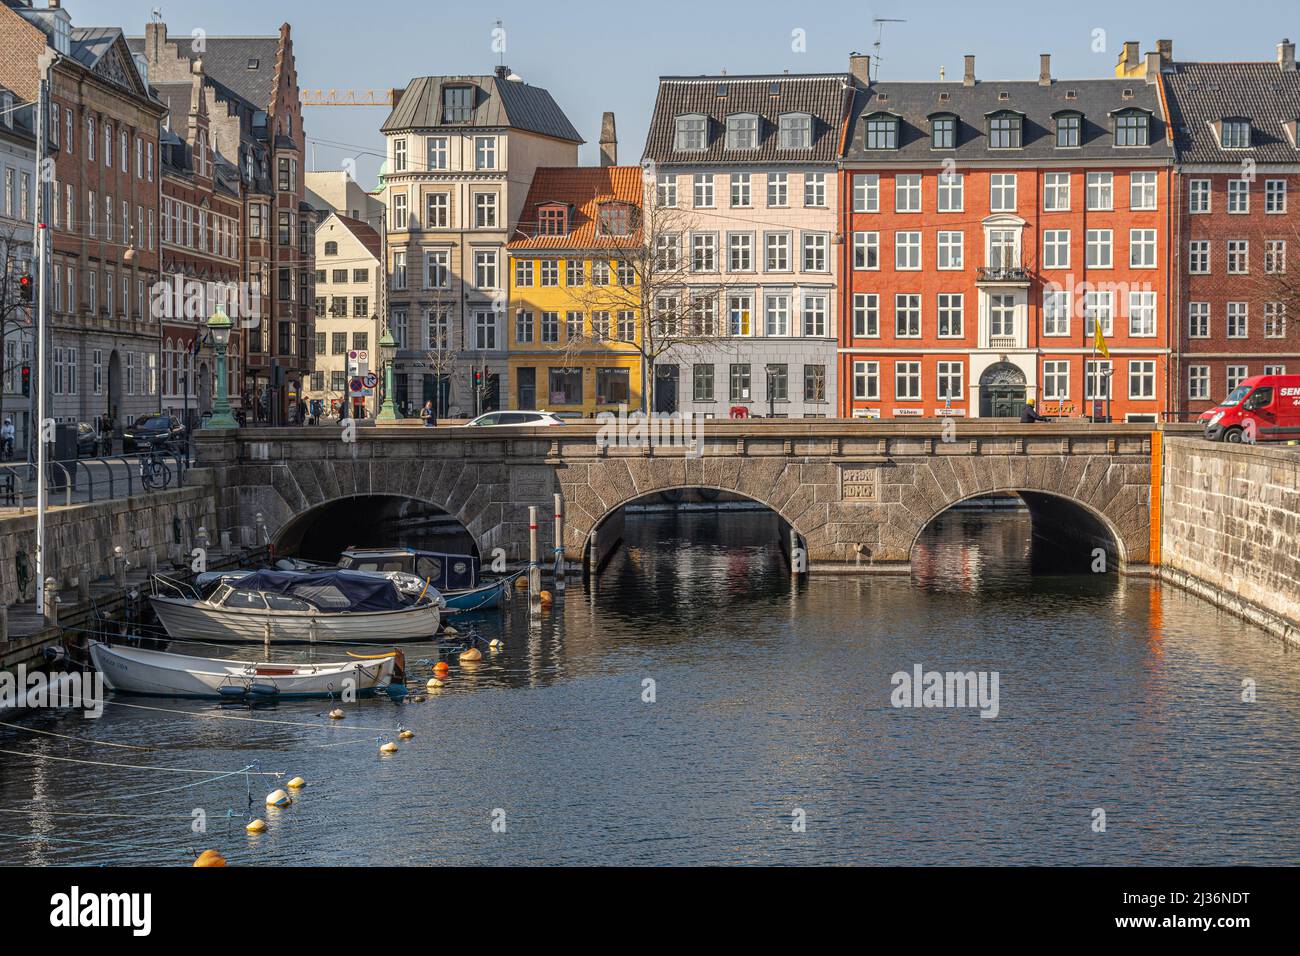 Colorful facades of typical houses in the old town of Copenhagen. In the foreground, the navigable canal that flows under the Storm Bridge. Denmark Stock Photo